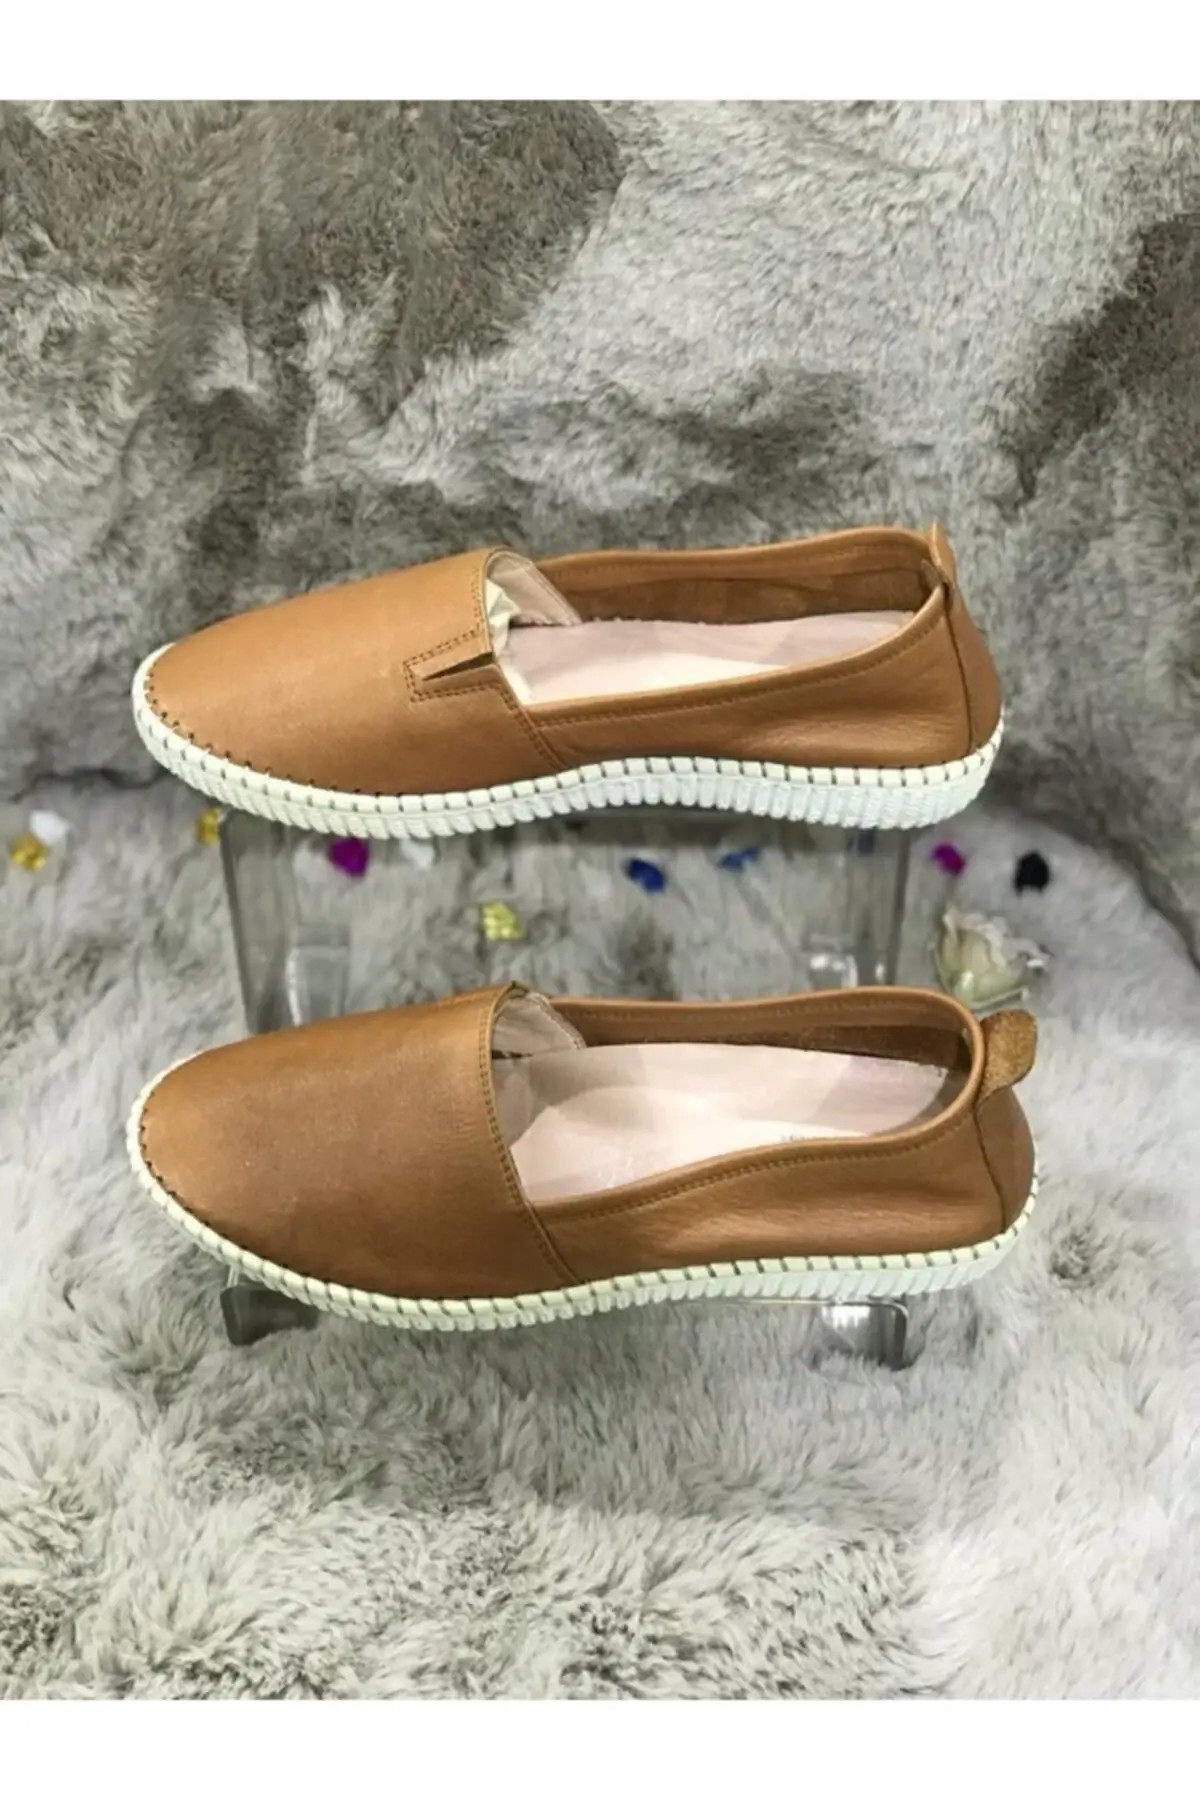 

Women Flats Shoes Tan Color anatomical Insole Outer Genuine Leather Casual Shoes Fashion Flats Casual Shoes